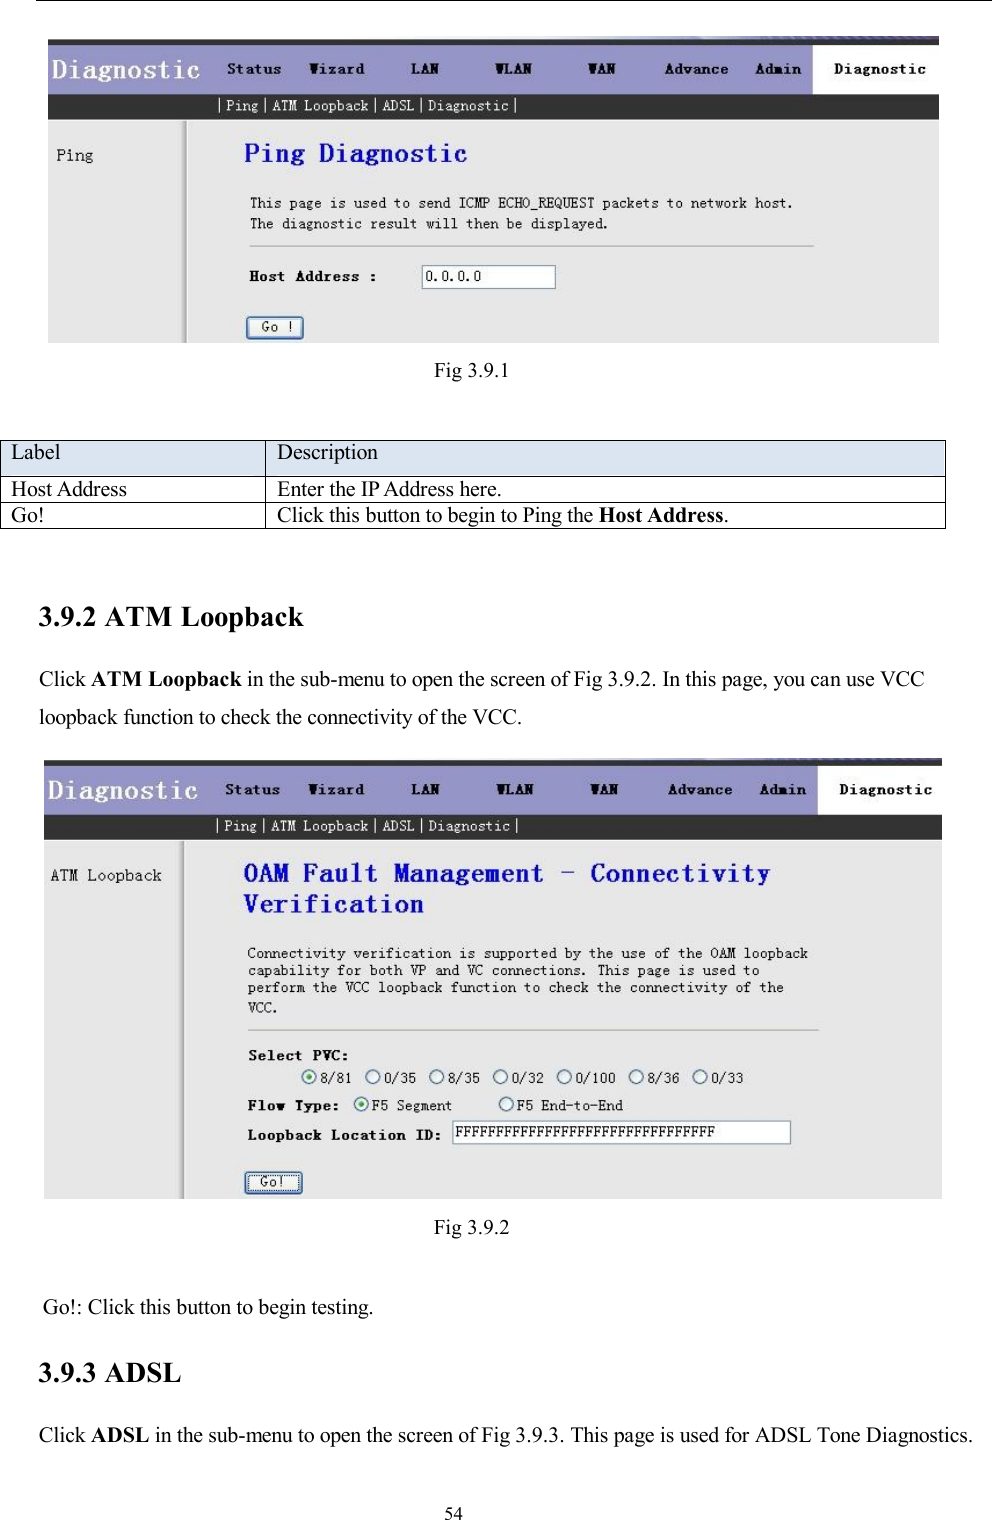                                                                     54  Fig 3.9.1  Label  Description Host Address  Enter the IP Address here. Go!  Click this button to begin to Ping the Host Address.  3.9.2 ATM Loopback Click ATM Loopback in the sub-menu to open the screen of Fig 3.9.2. In this page, you can use VCC loopback function to check the connectivity of the VCC.  Fig 3.9.2    Go!: Click this button to begin testing. 3.9.3 ADSL Click ADSL in the sub-menu to open the screen of Fig 3.9.3. This page is used for ADSL Tone Diagnostics. 